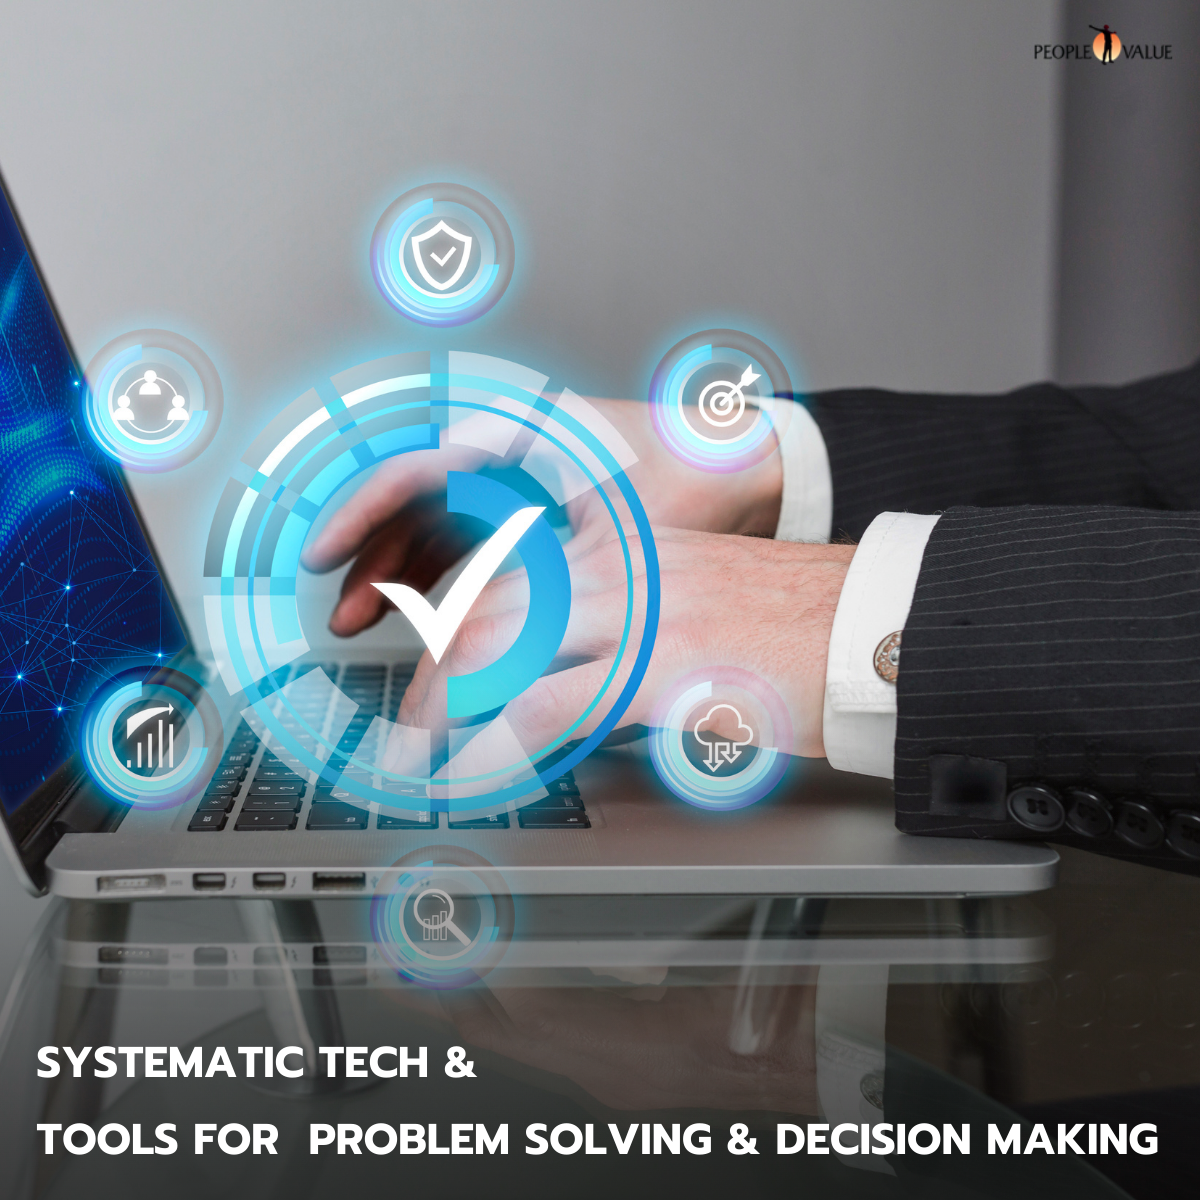 Systematic Tech & Tools for Problem Solving & Decision Making